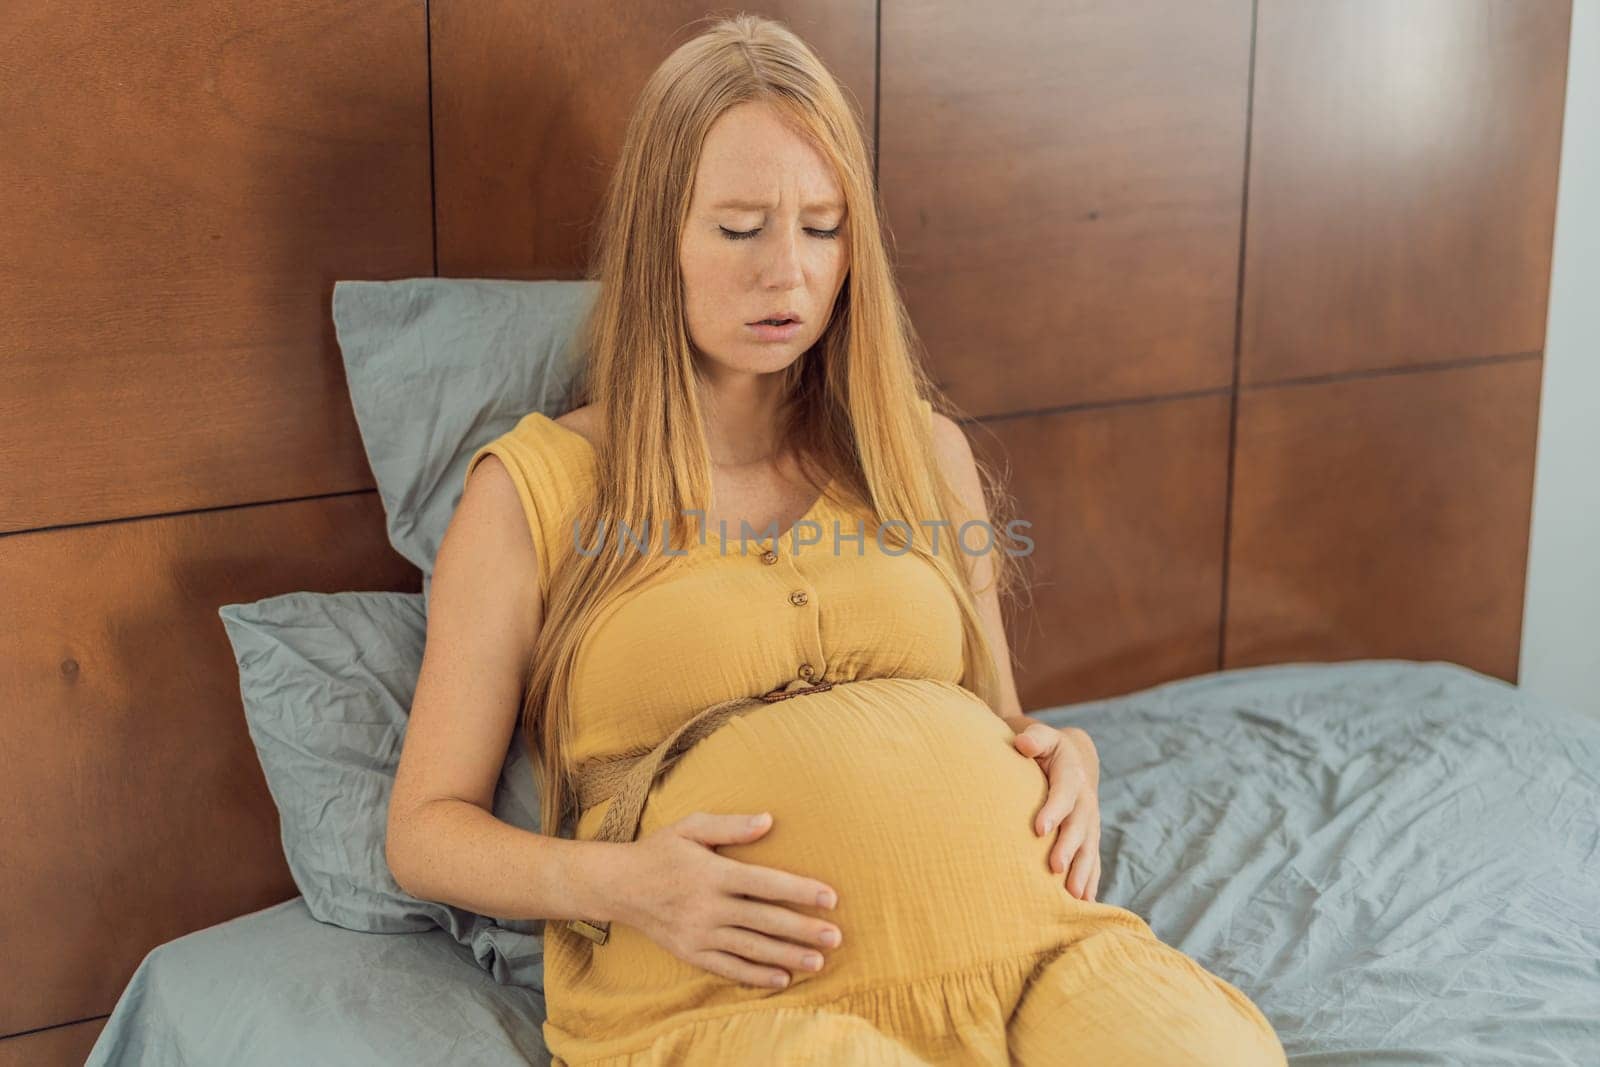 Expectant woman experiences discomfort, feeling unwell during pregnancy by galitskaya